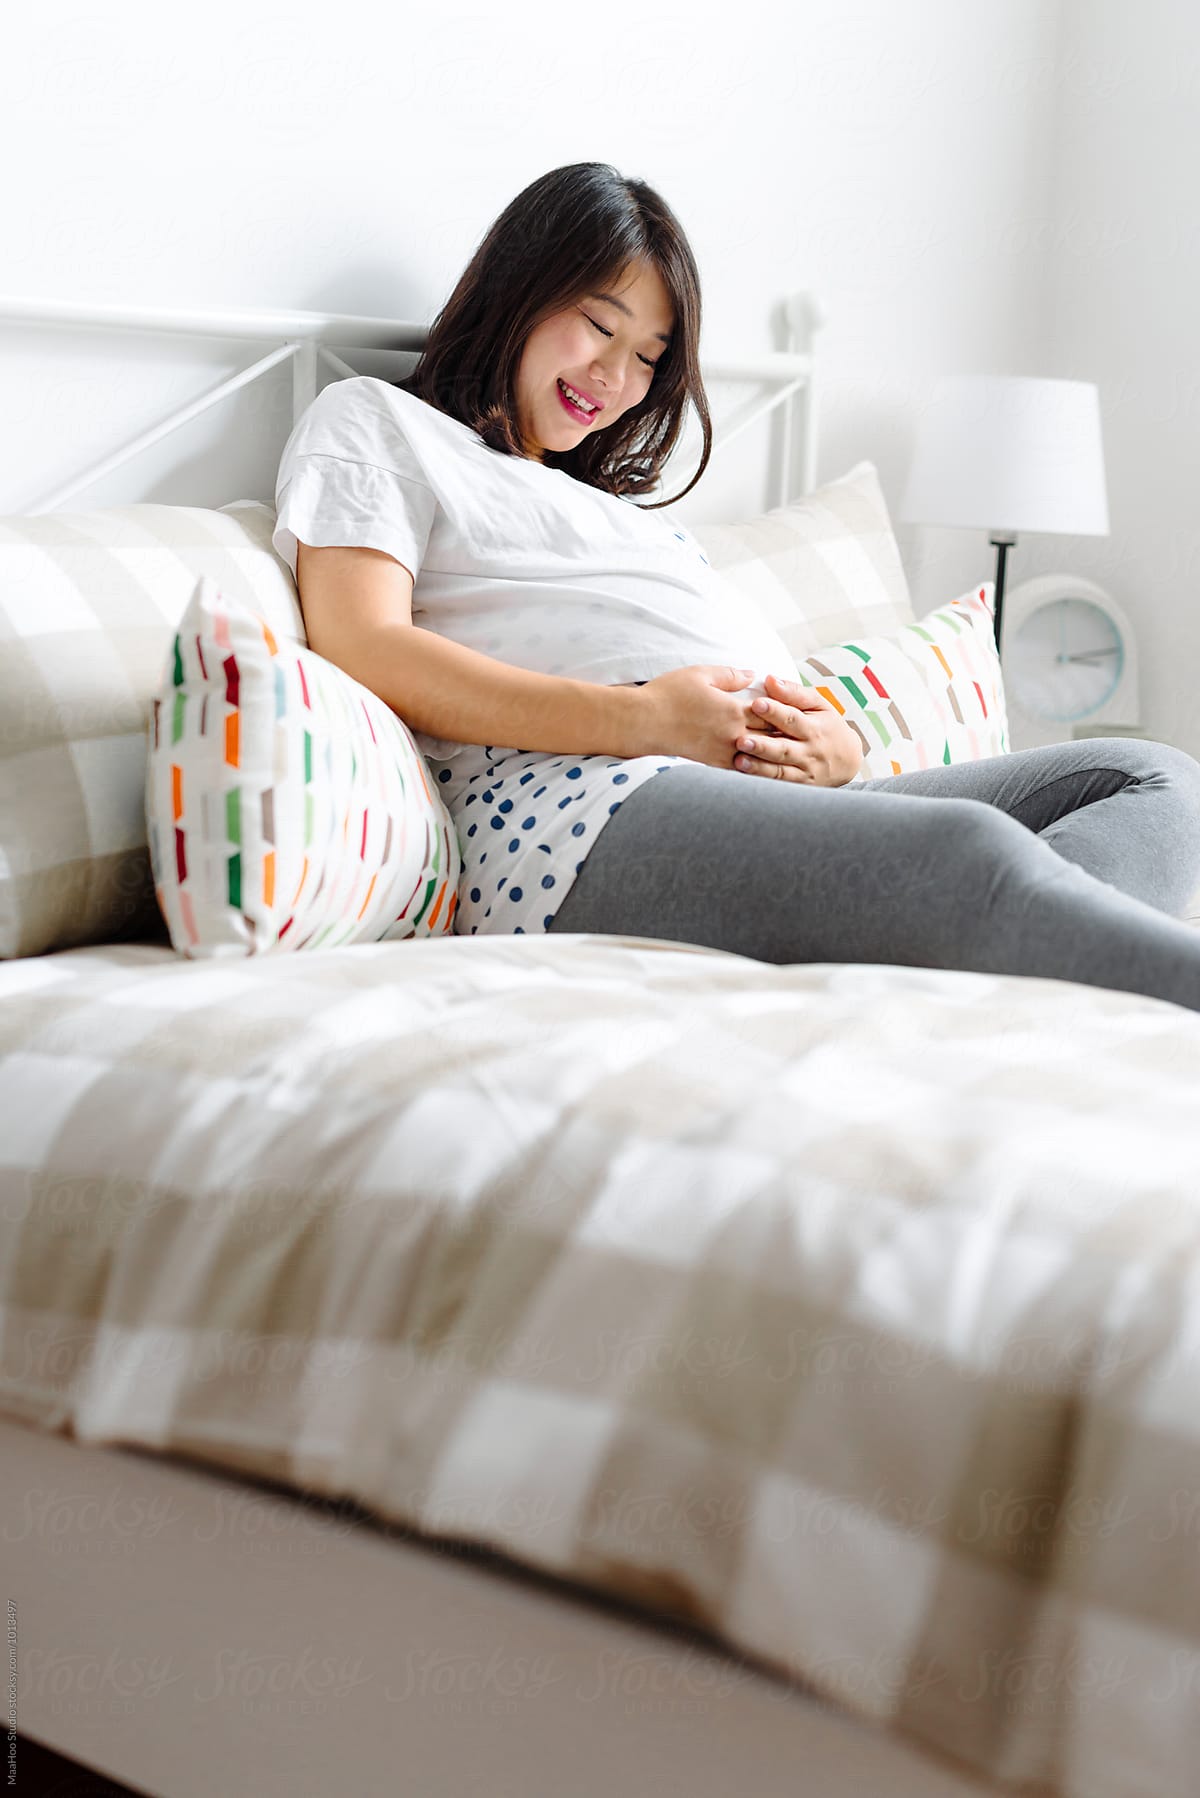 Pregnant Woman Having A Rest On Bed By Stocksy Contributor Maahoo Stocksy